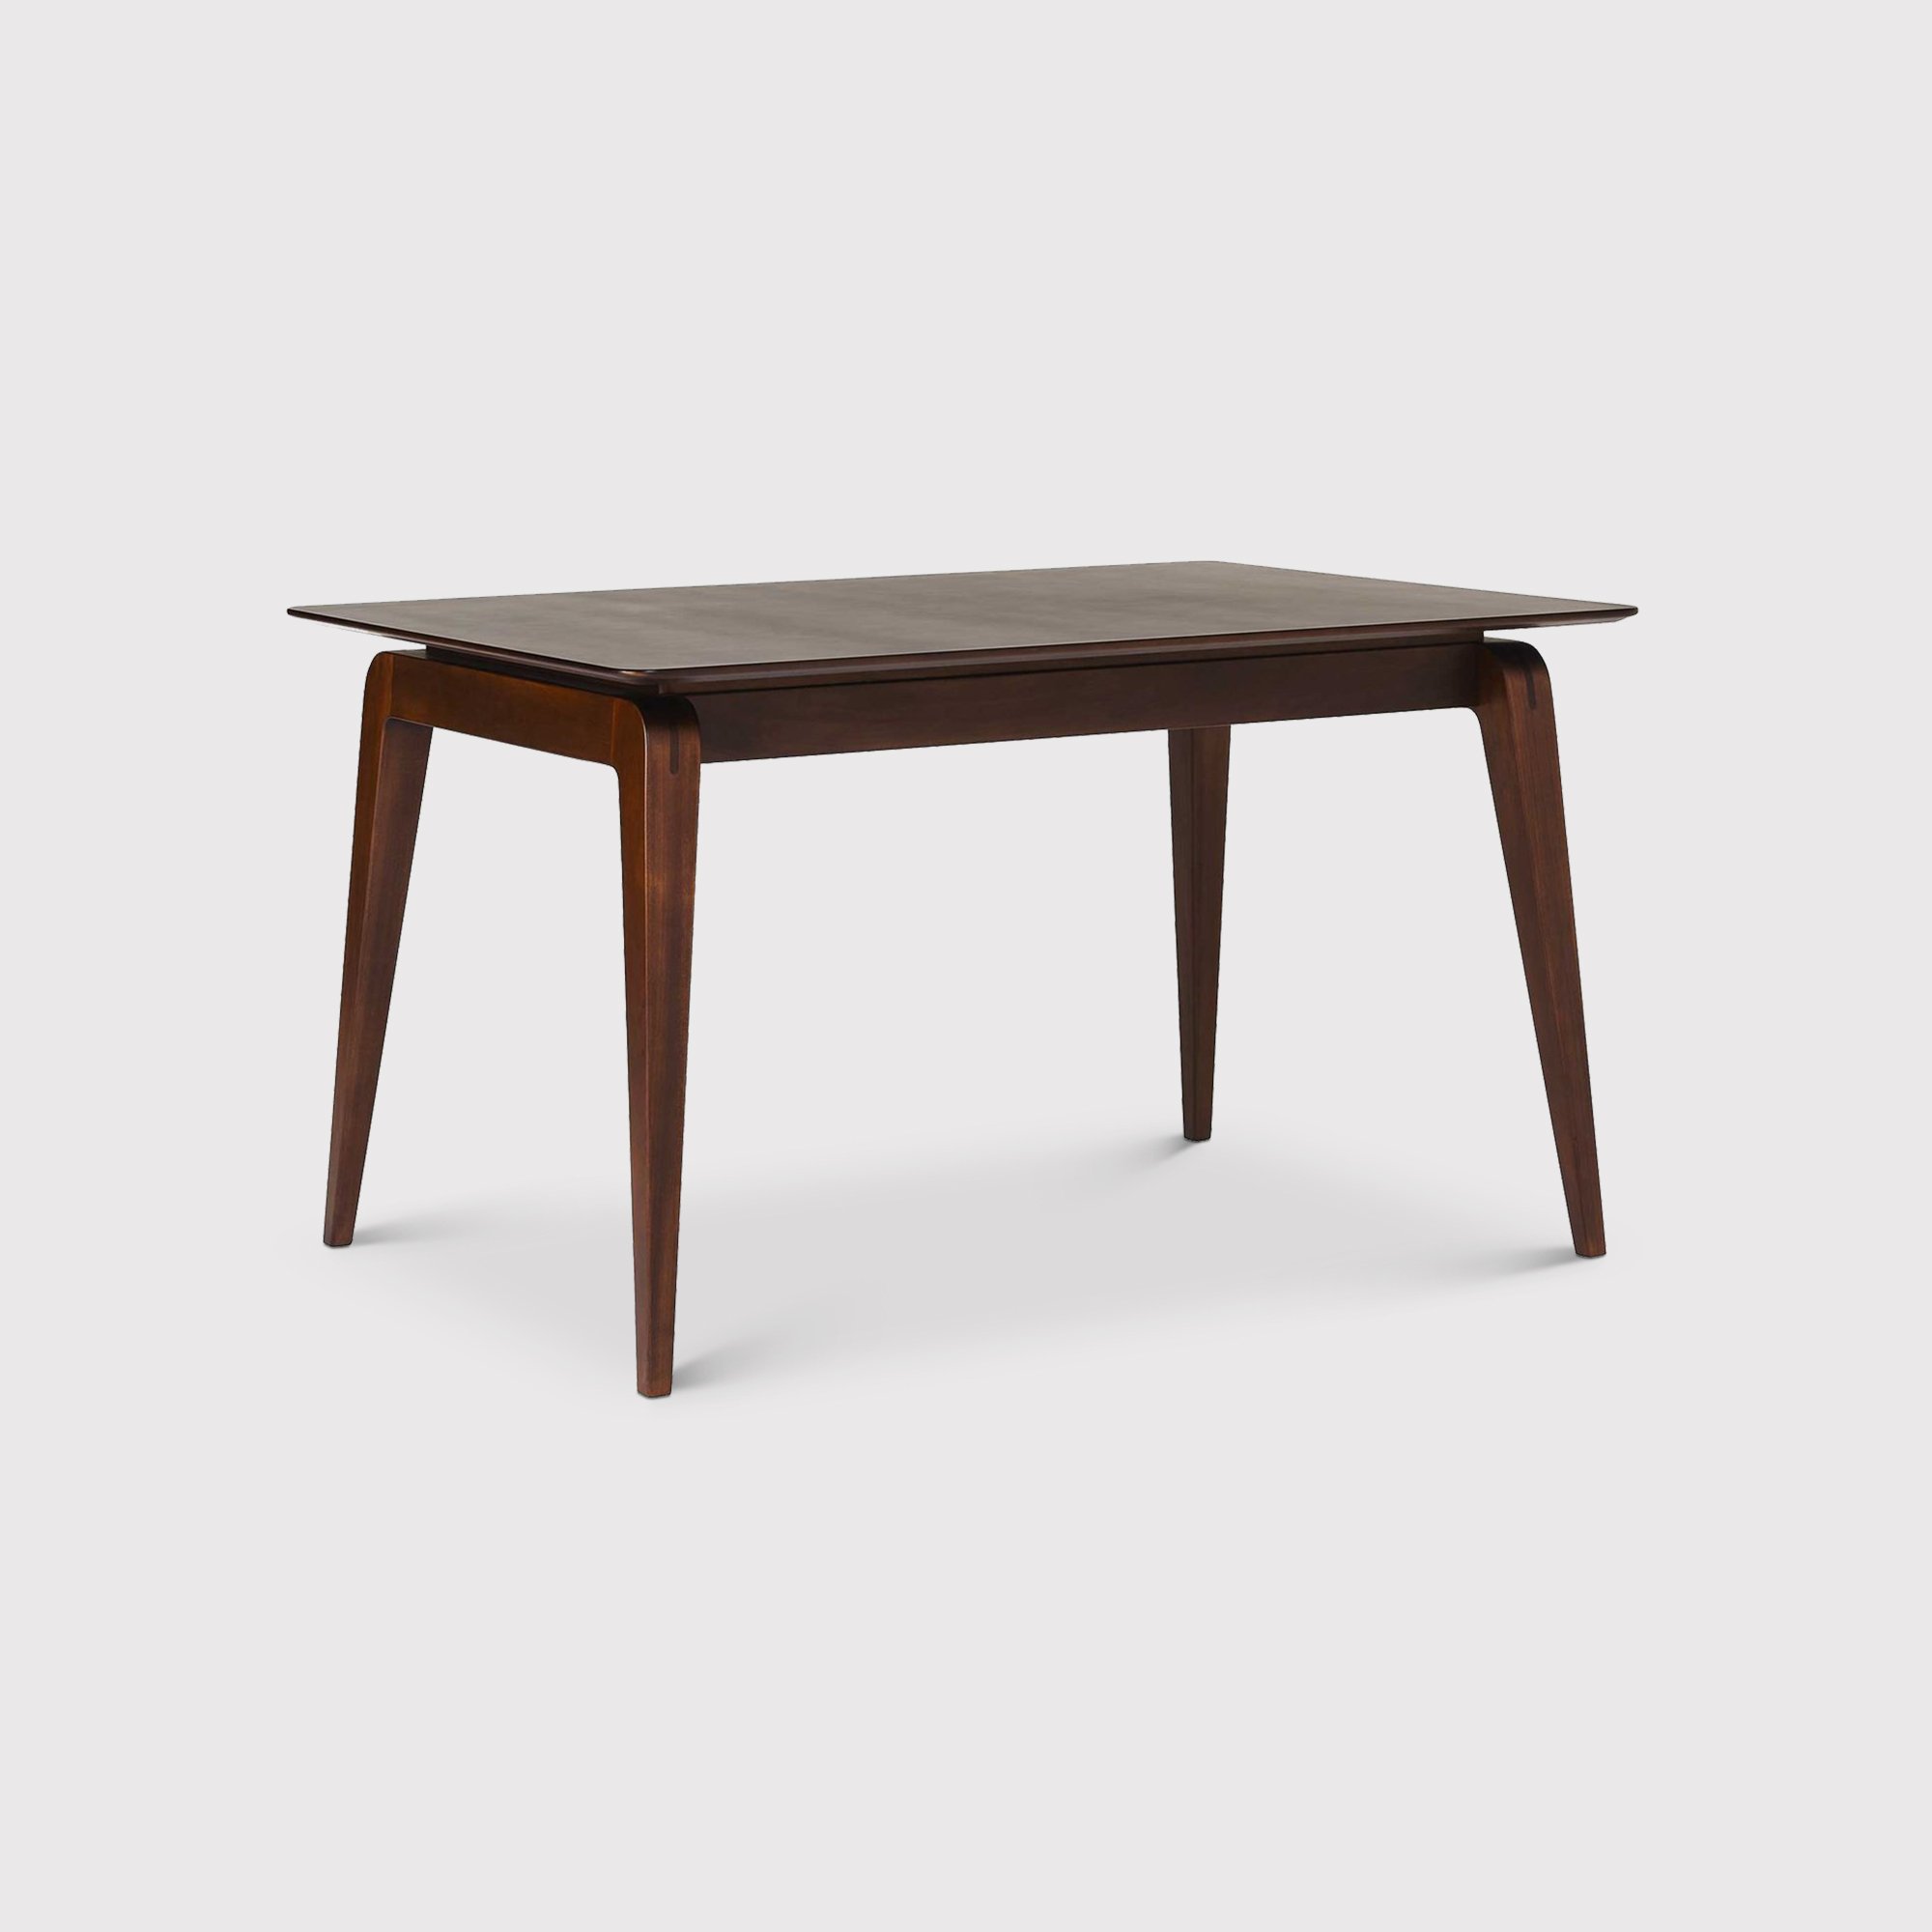 Ercol Lugo Small Dining Table, Tulip Wood | Barker & Stonehouse